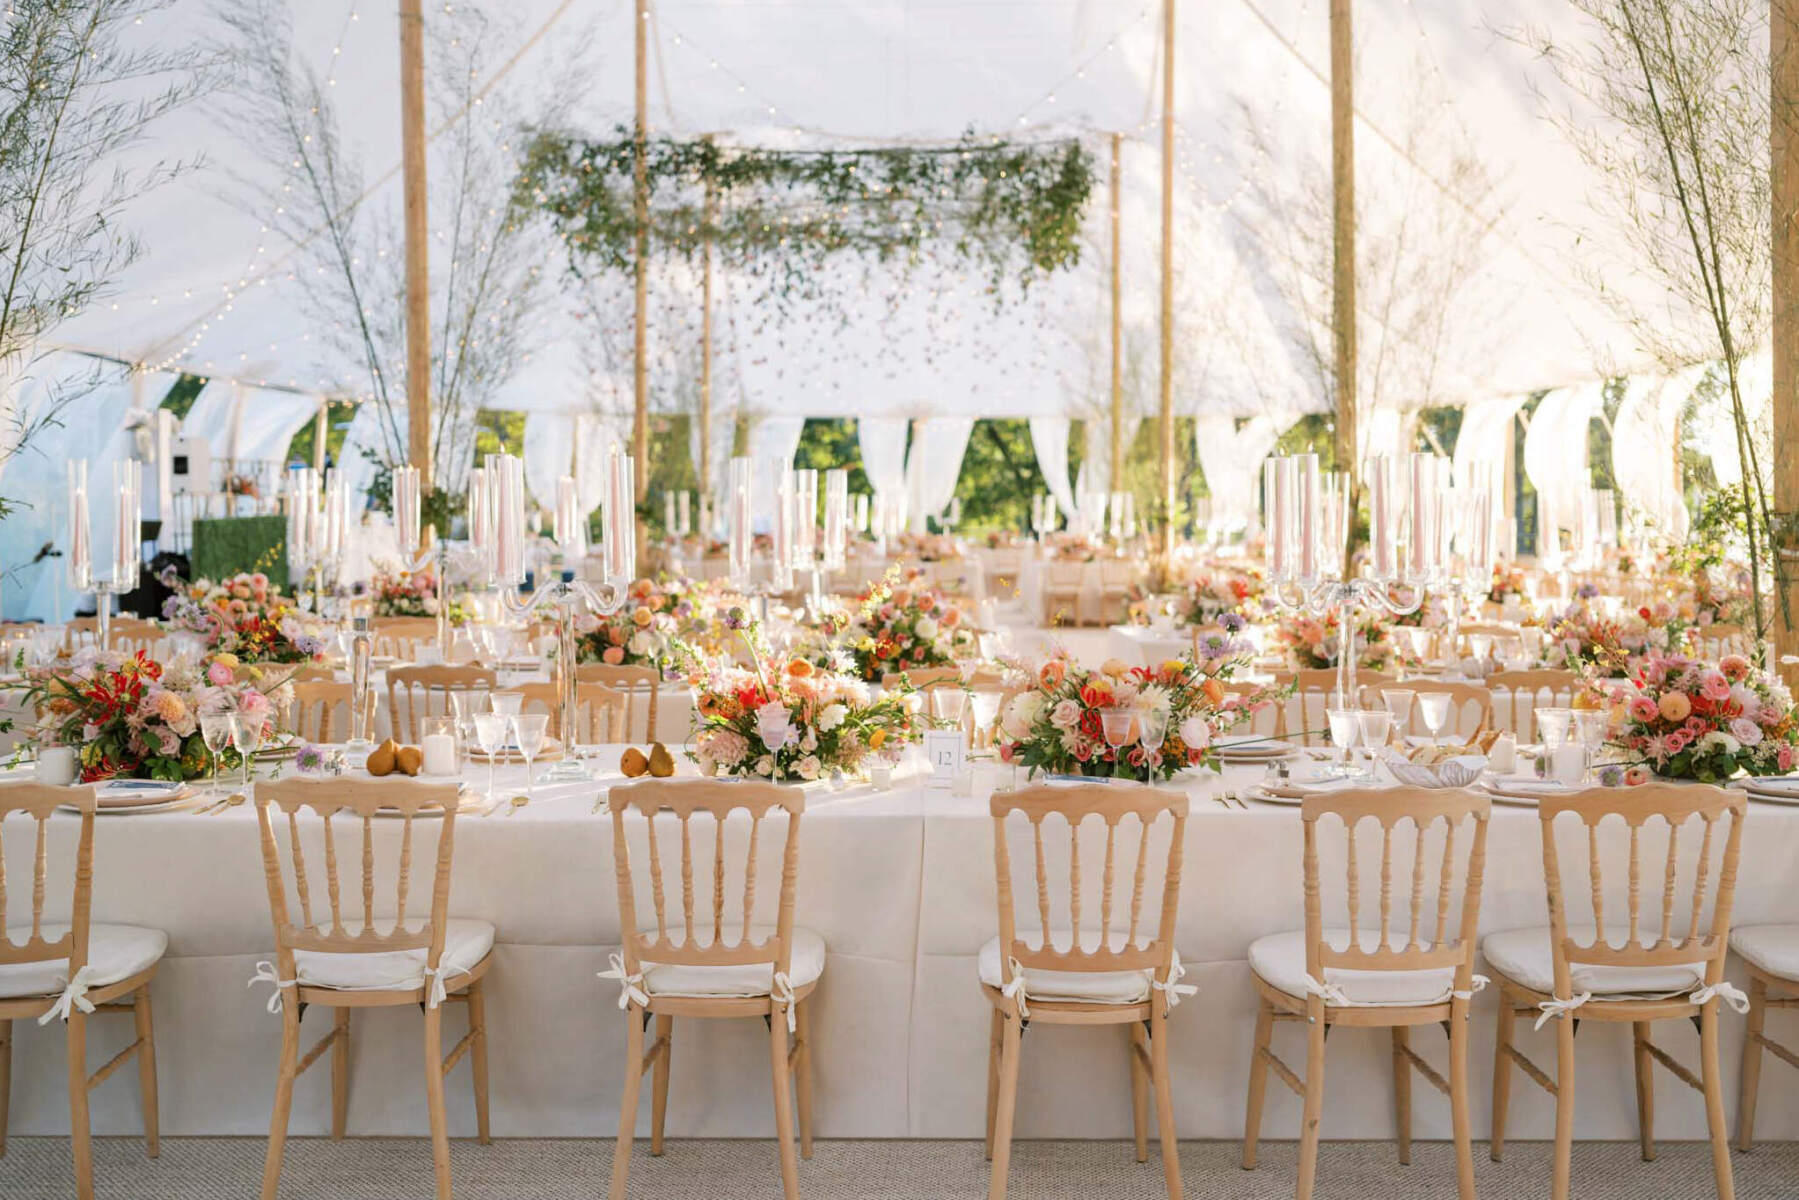 The tented reception of a waterfront wedding, decorated with a canopy of greenery and folded paper cranes over the dance floor and centerpieces made with a variety of warm-hued flowers and fruit, paired with elegant pink taper candles.